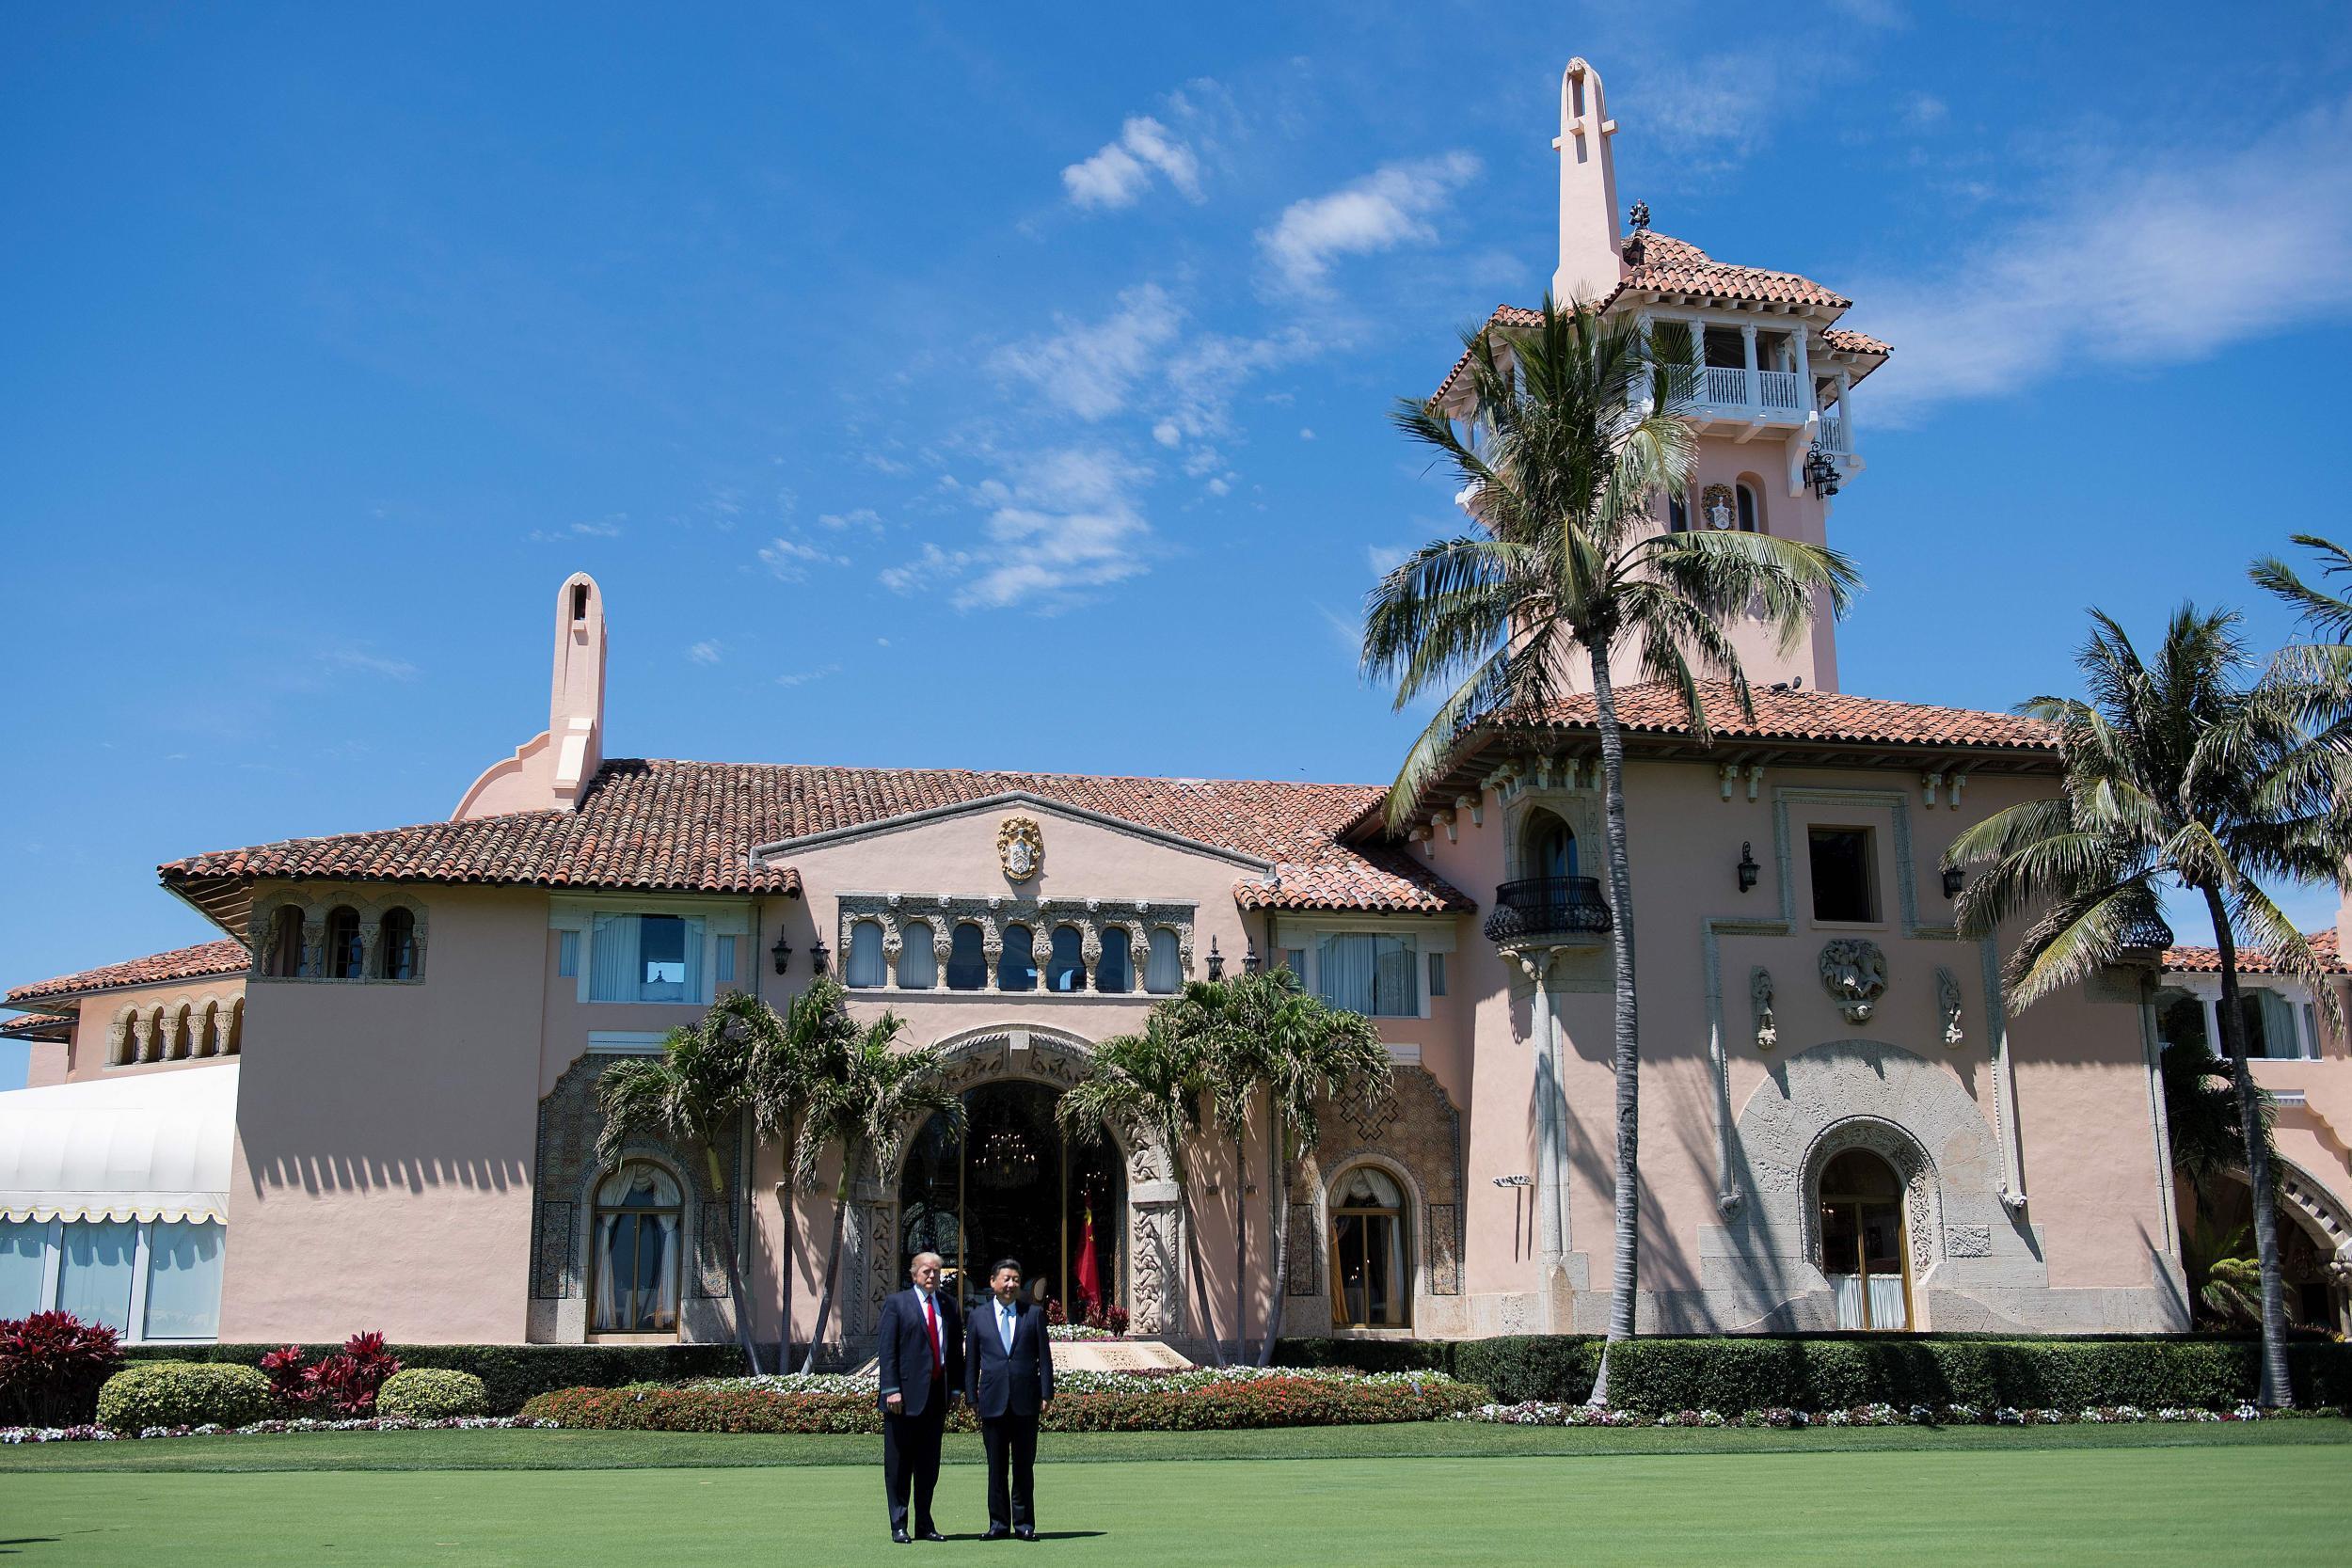 Donald Trump's Mar-a-lago estate in West Palm Beach, Florida (Getty Images)